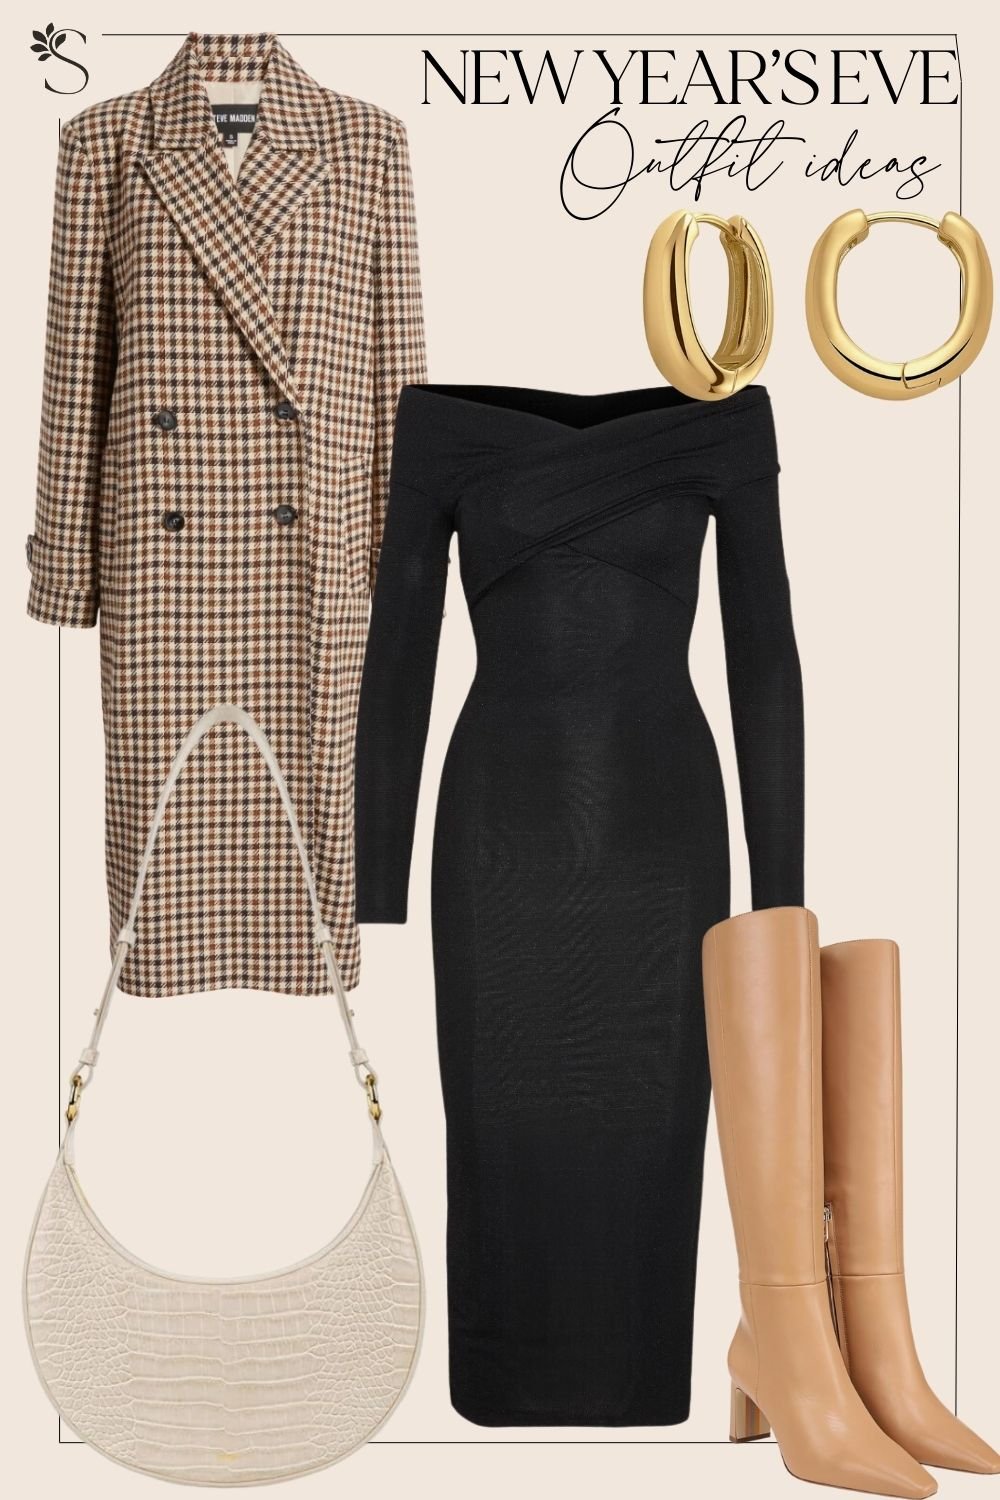 New Years Eve Outfit Ideas, NYE Essentials